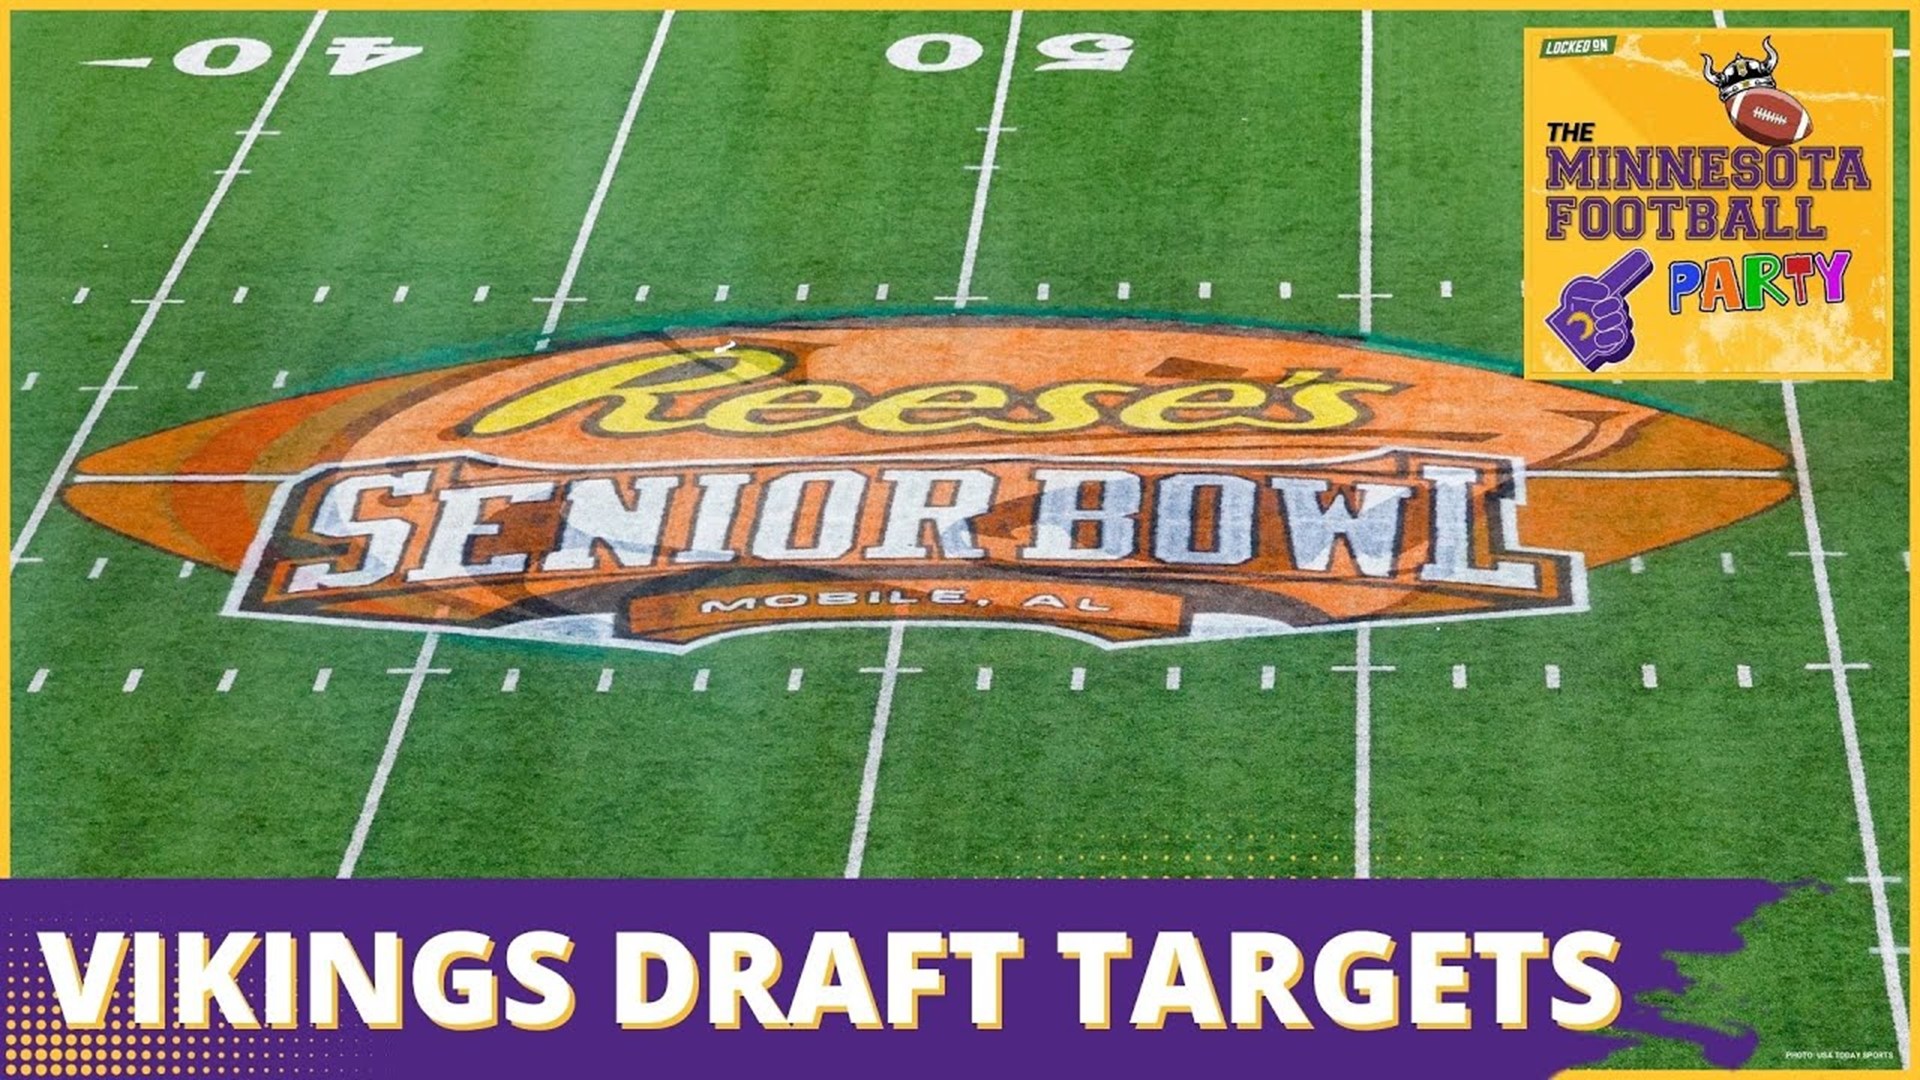 We’re joined by NFL Draft scout Russell Brown who’s down in Mobile, Alabama to find the next wave of top prospects the Vikings’ front office should be targeting.